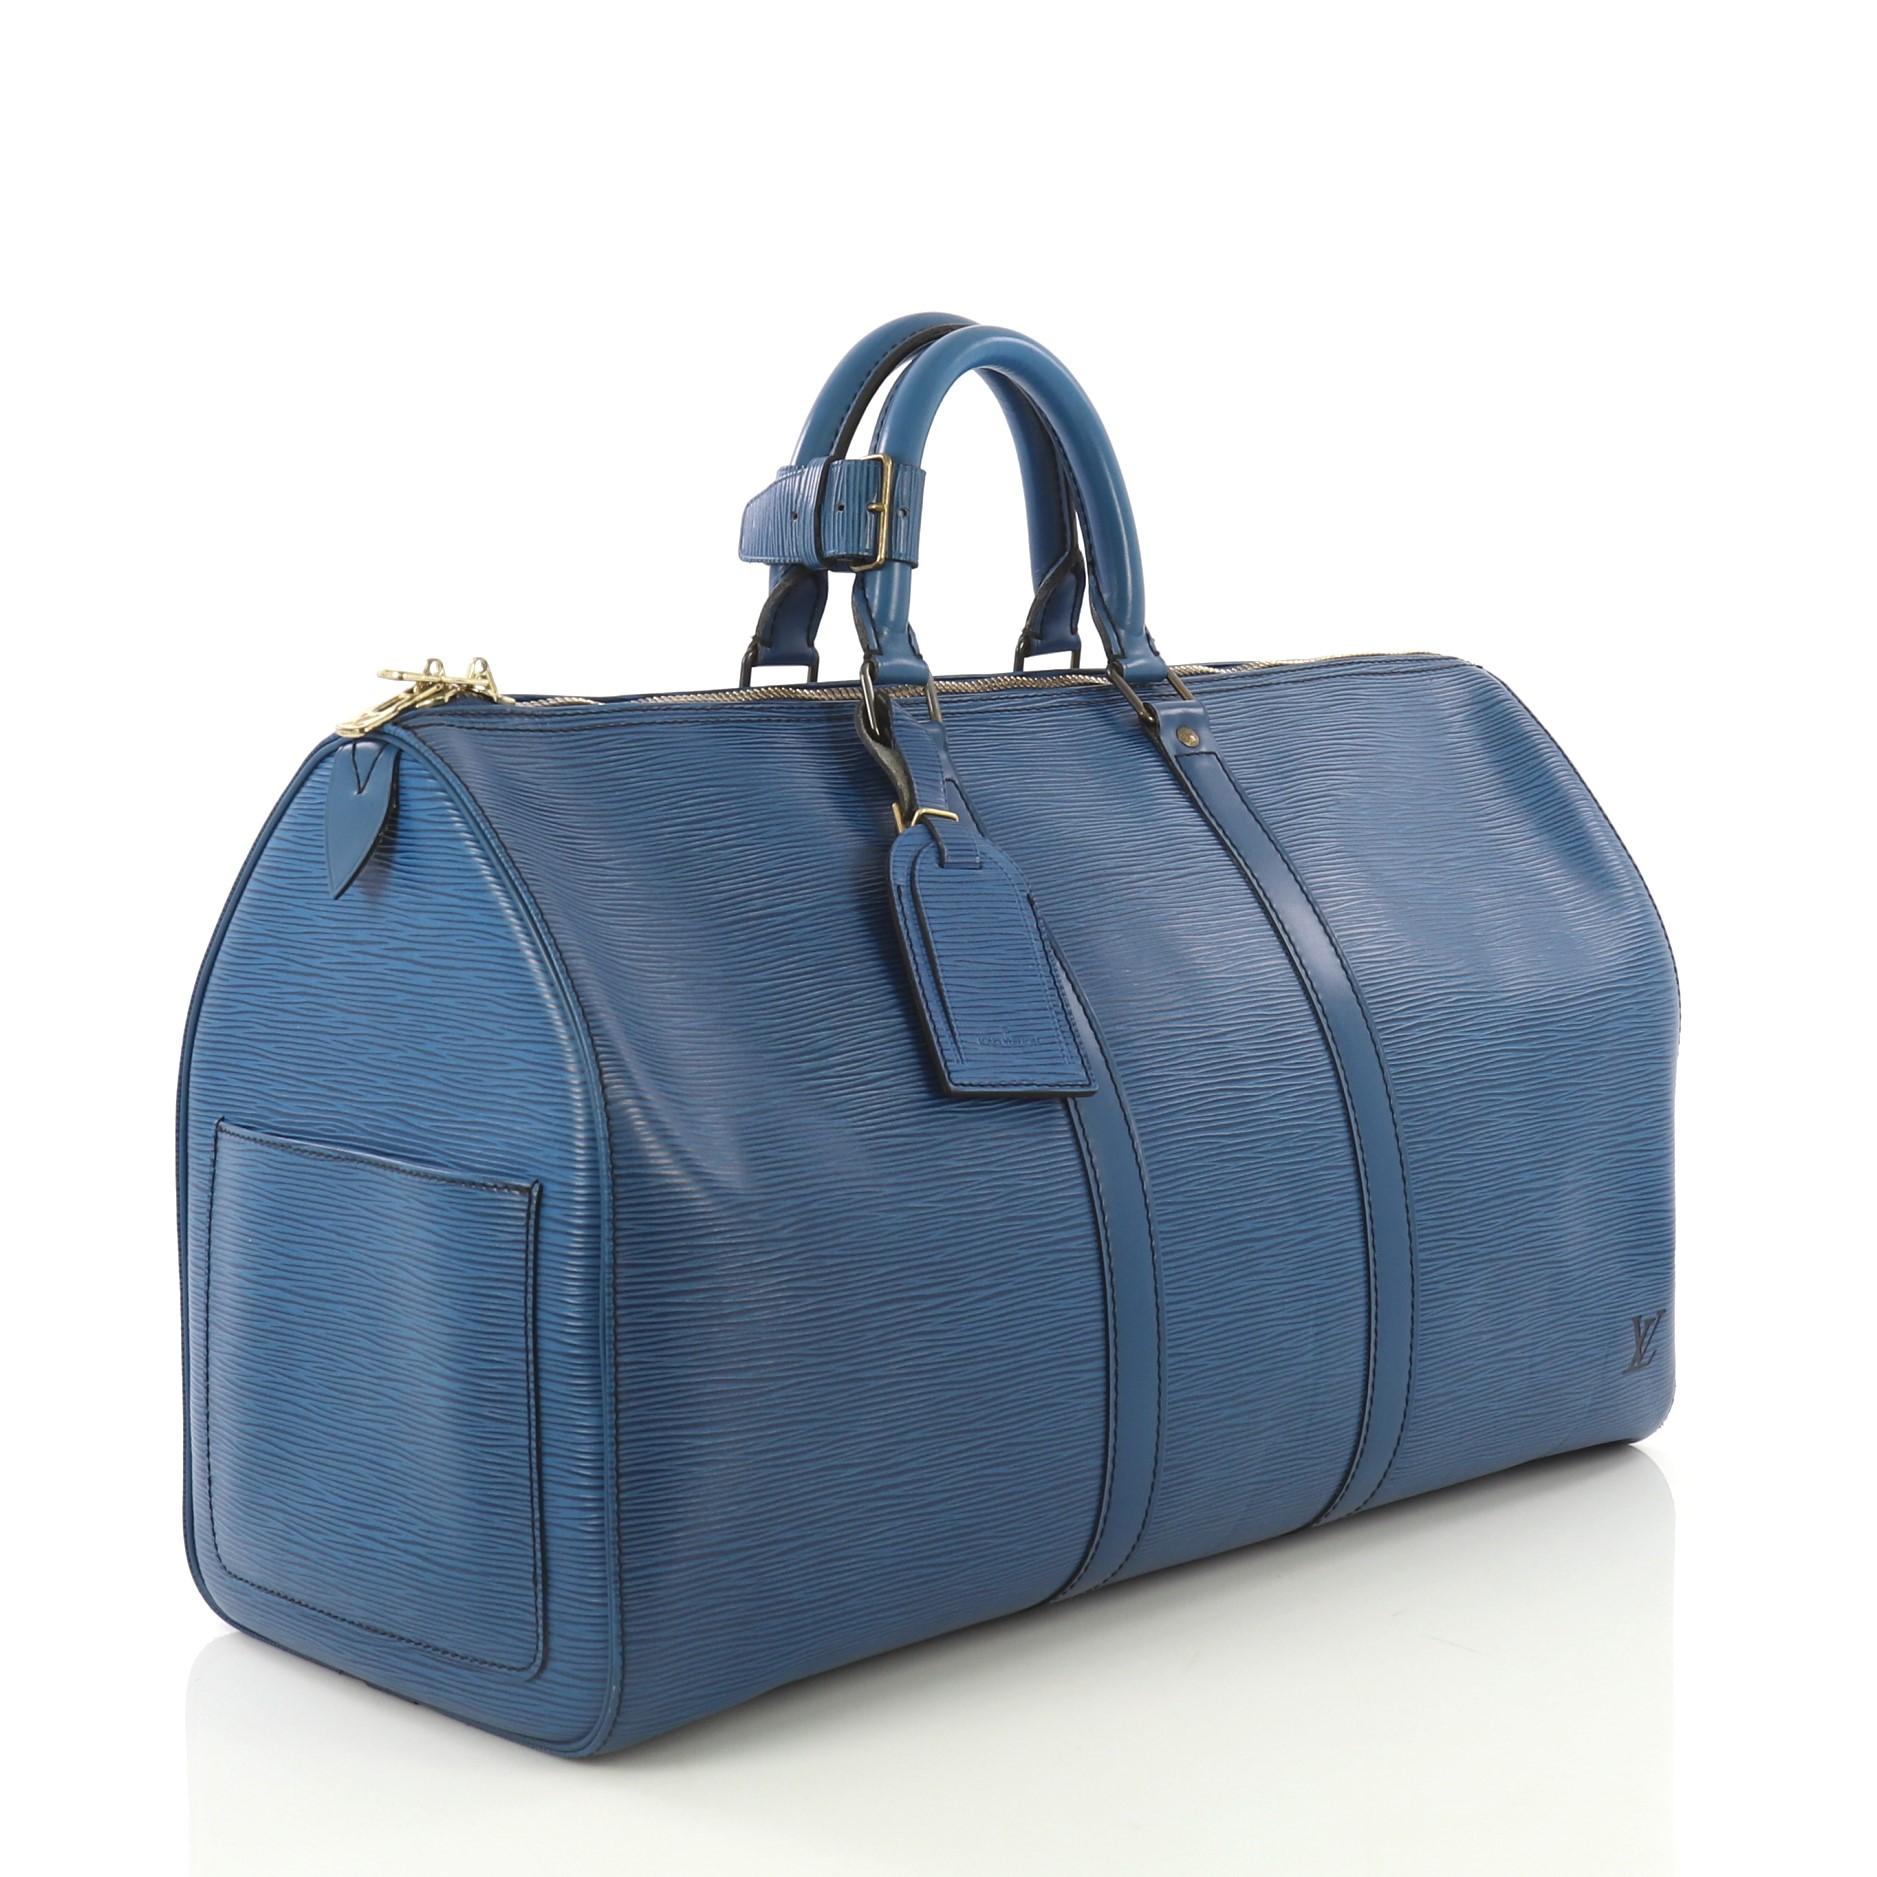 This Louis Vuitton Keepall Bag Epi Leather 45, crafted from blue epi leather, features dual rolled handles, subtle LV logo, and gold-tone hardware. Its zip closure opens to a blue raw leather interior. Authenticity code reads: VI0970. 

Estimated